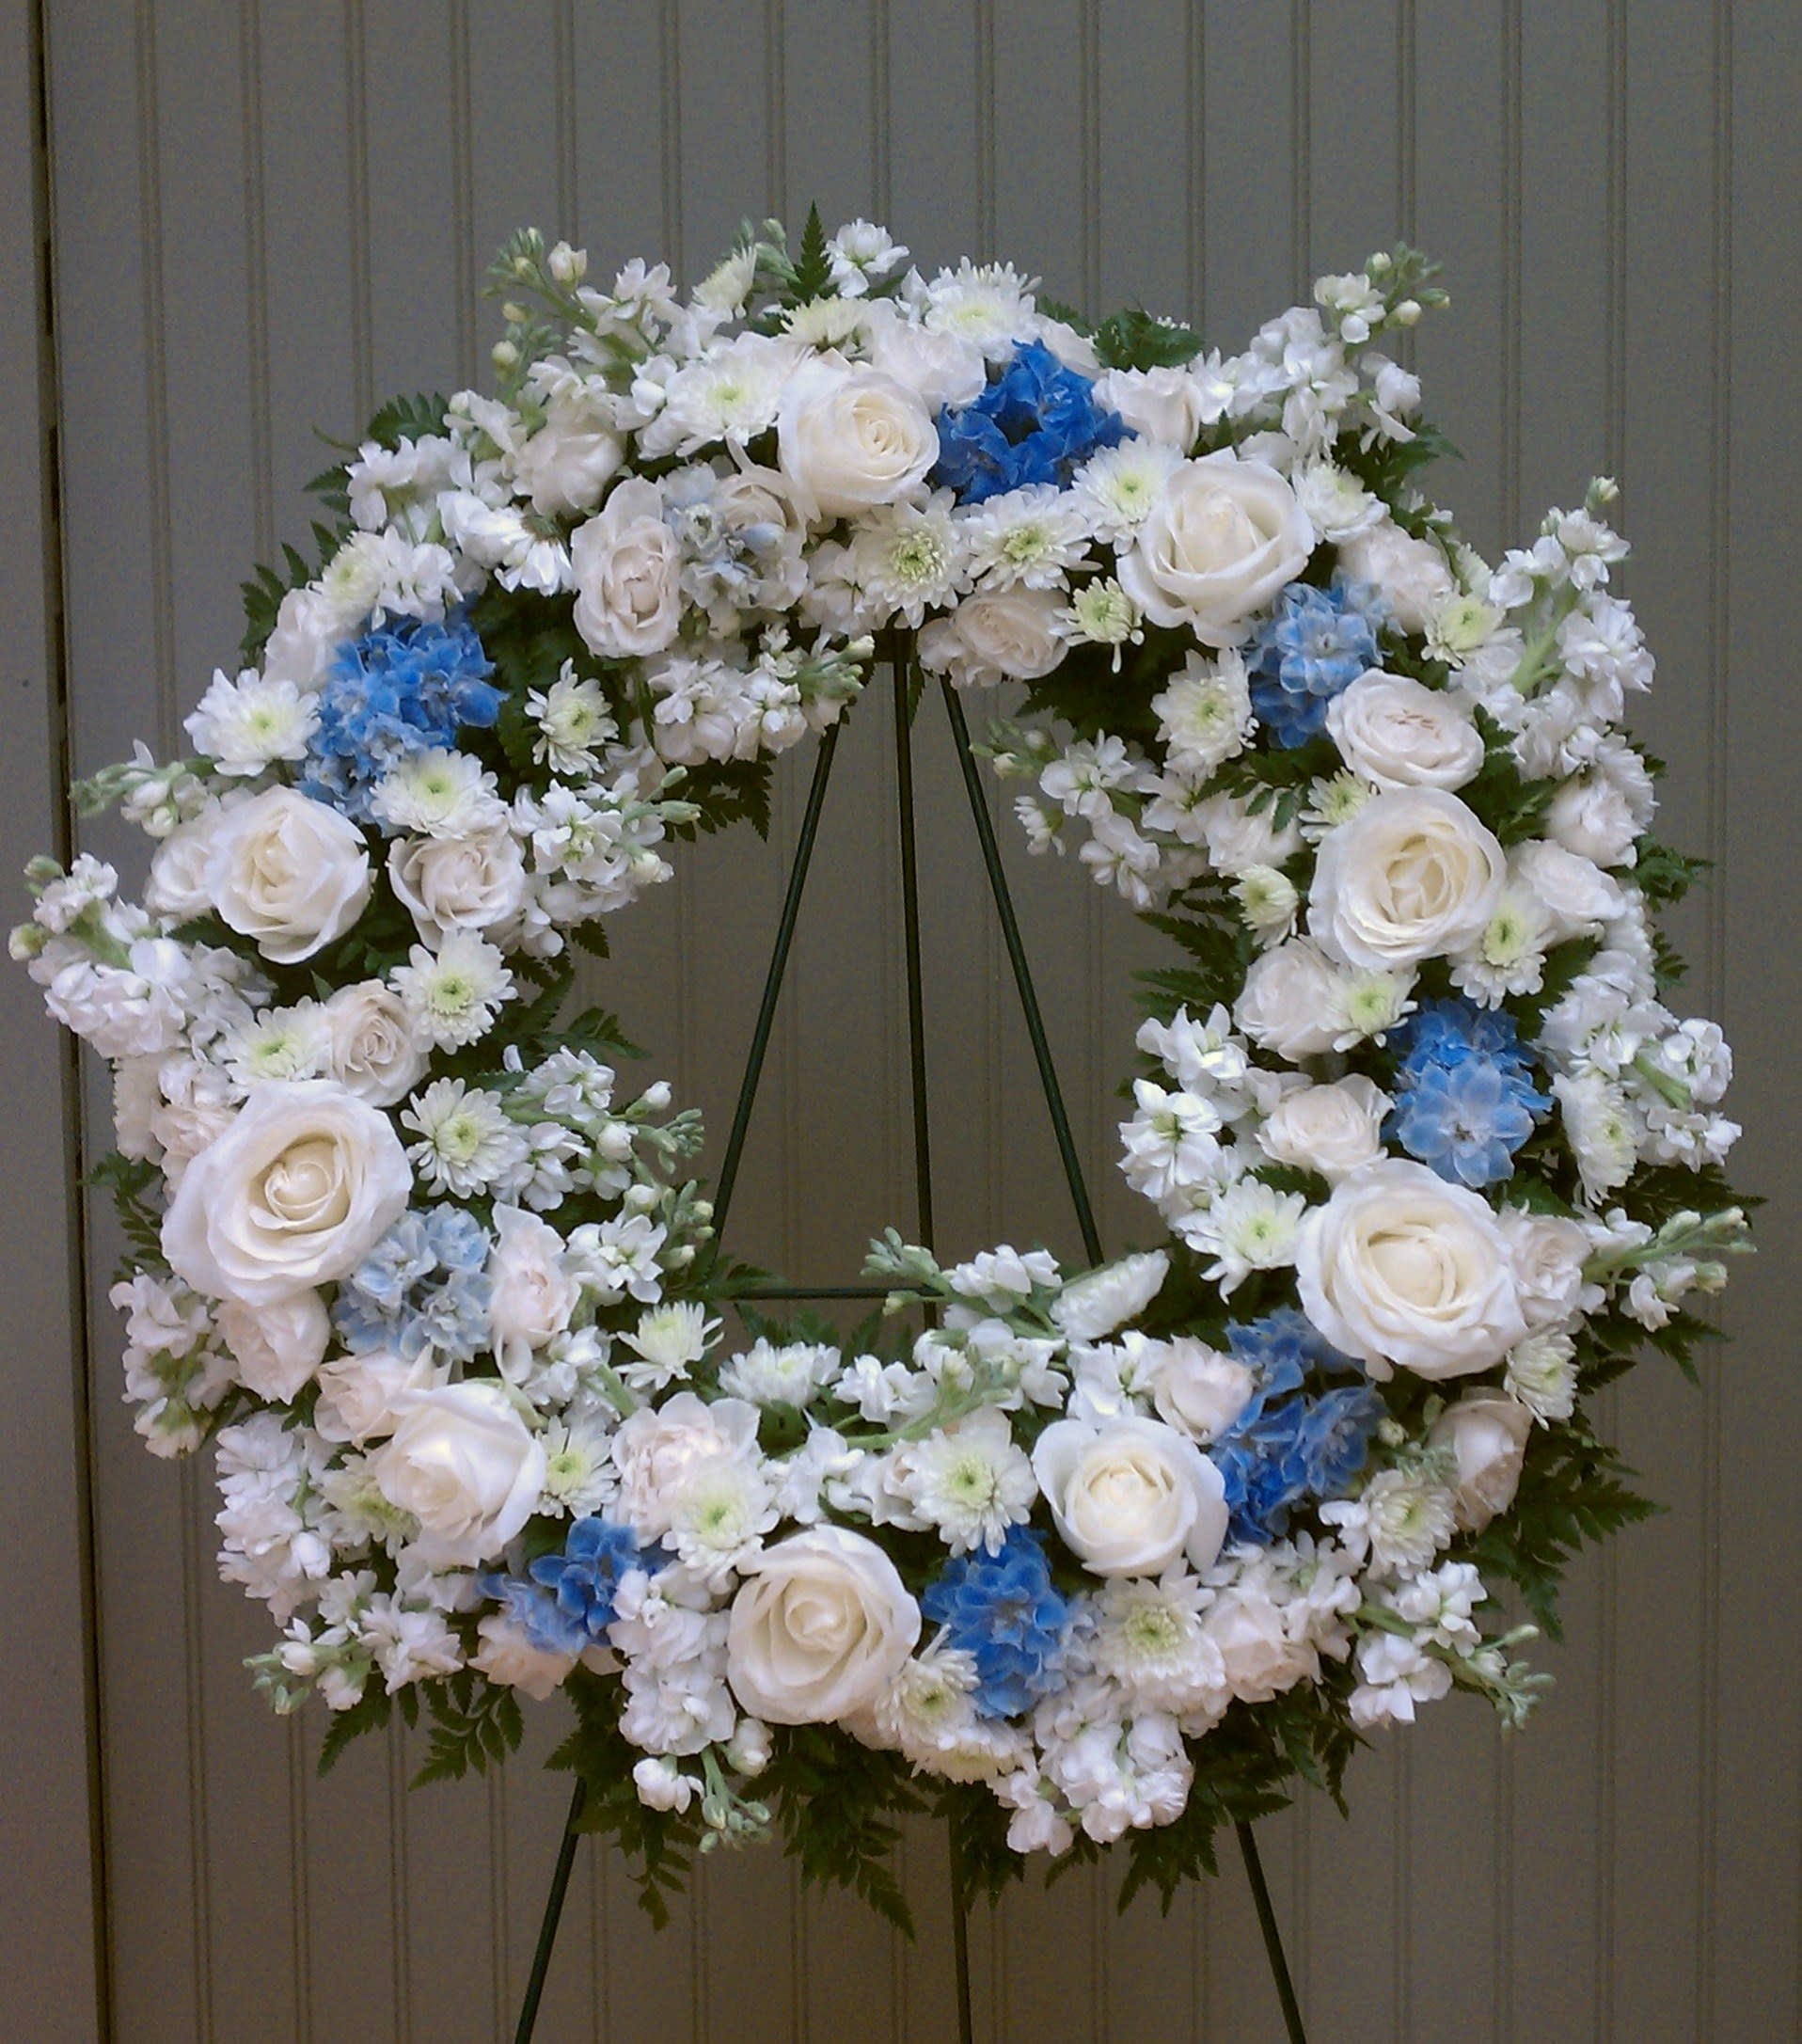 Peacock Blue & White Funeral Wreath Flowers